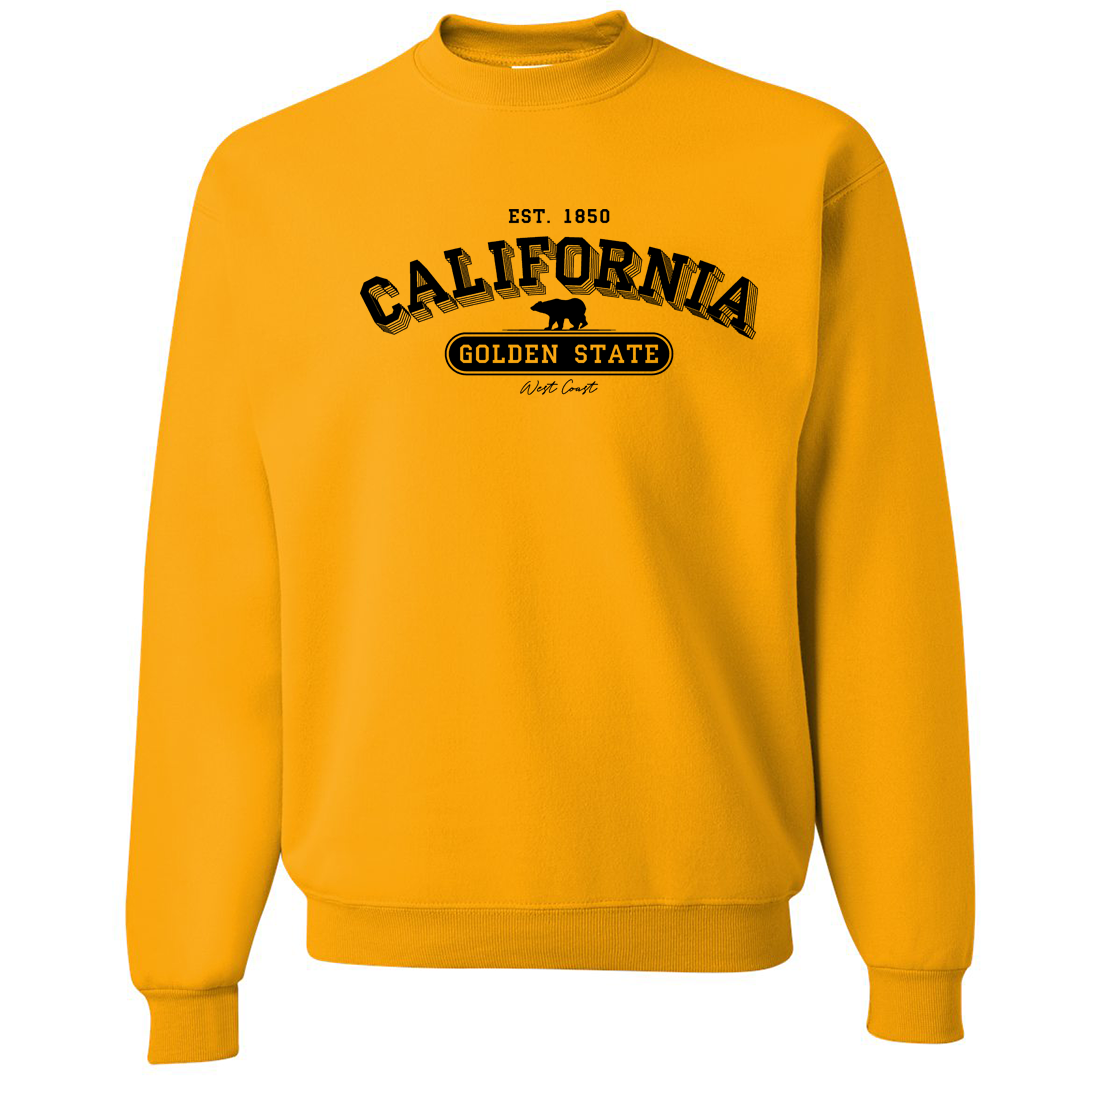 golden state sweater